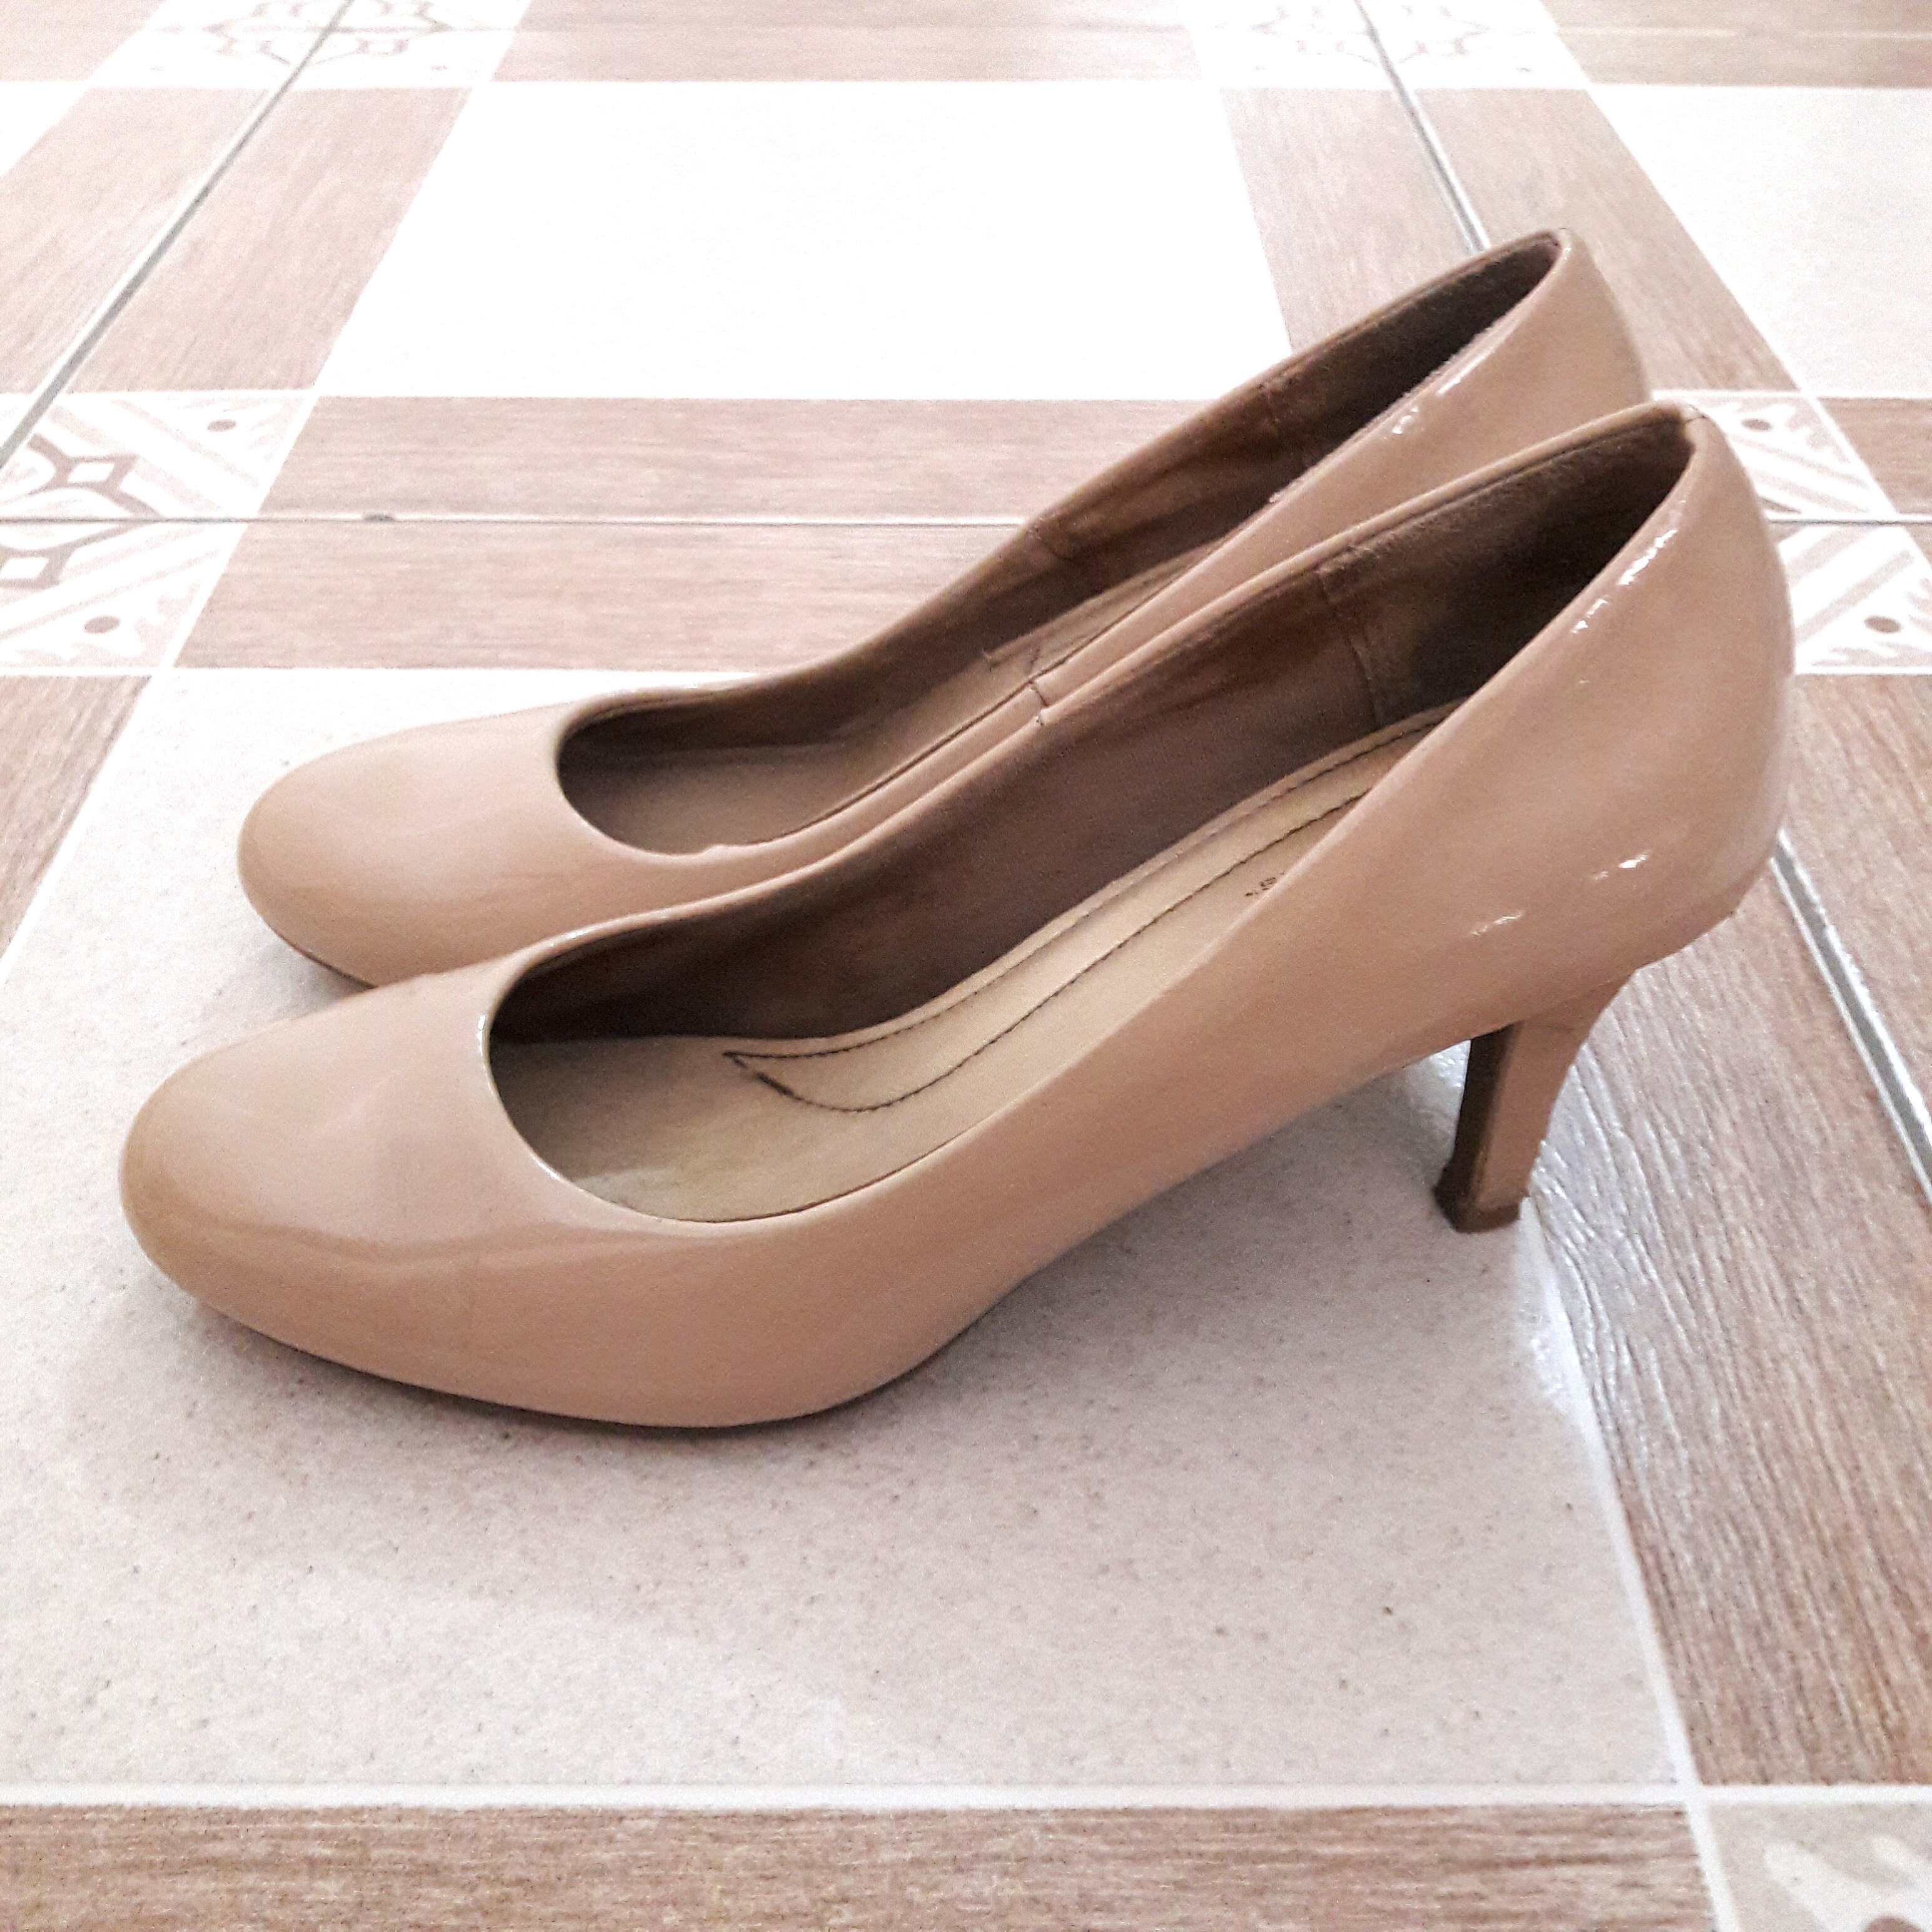 payless nude pumps